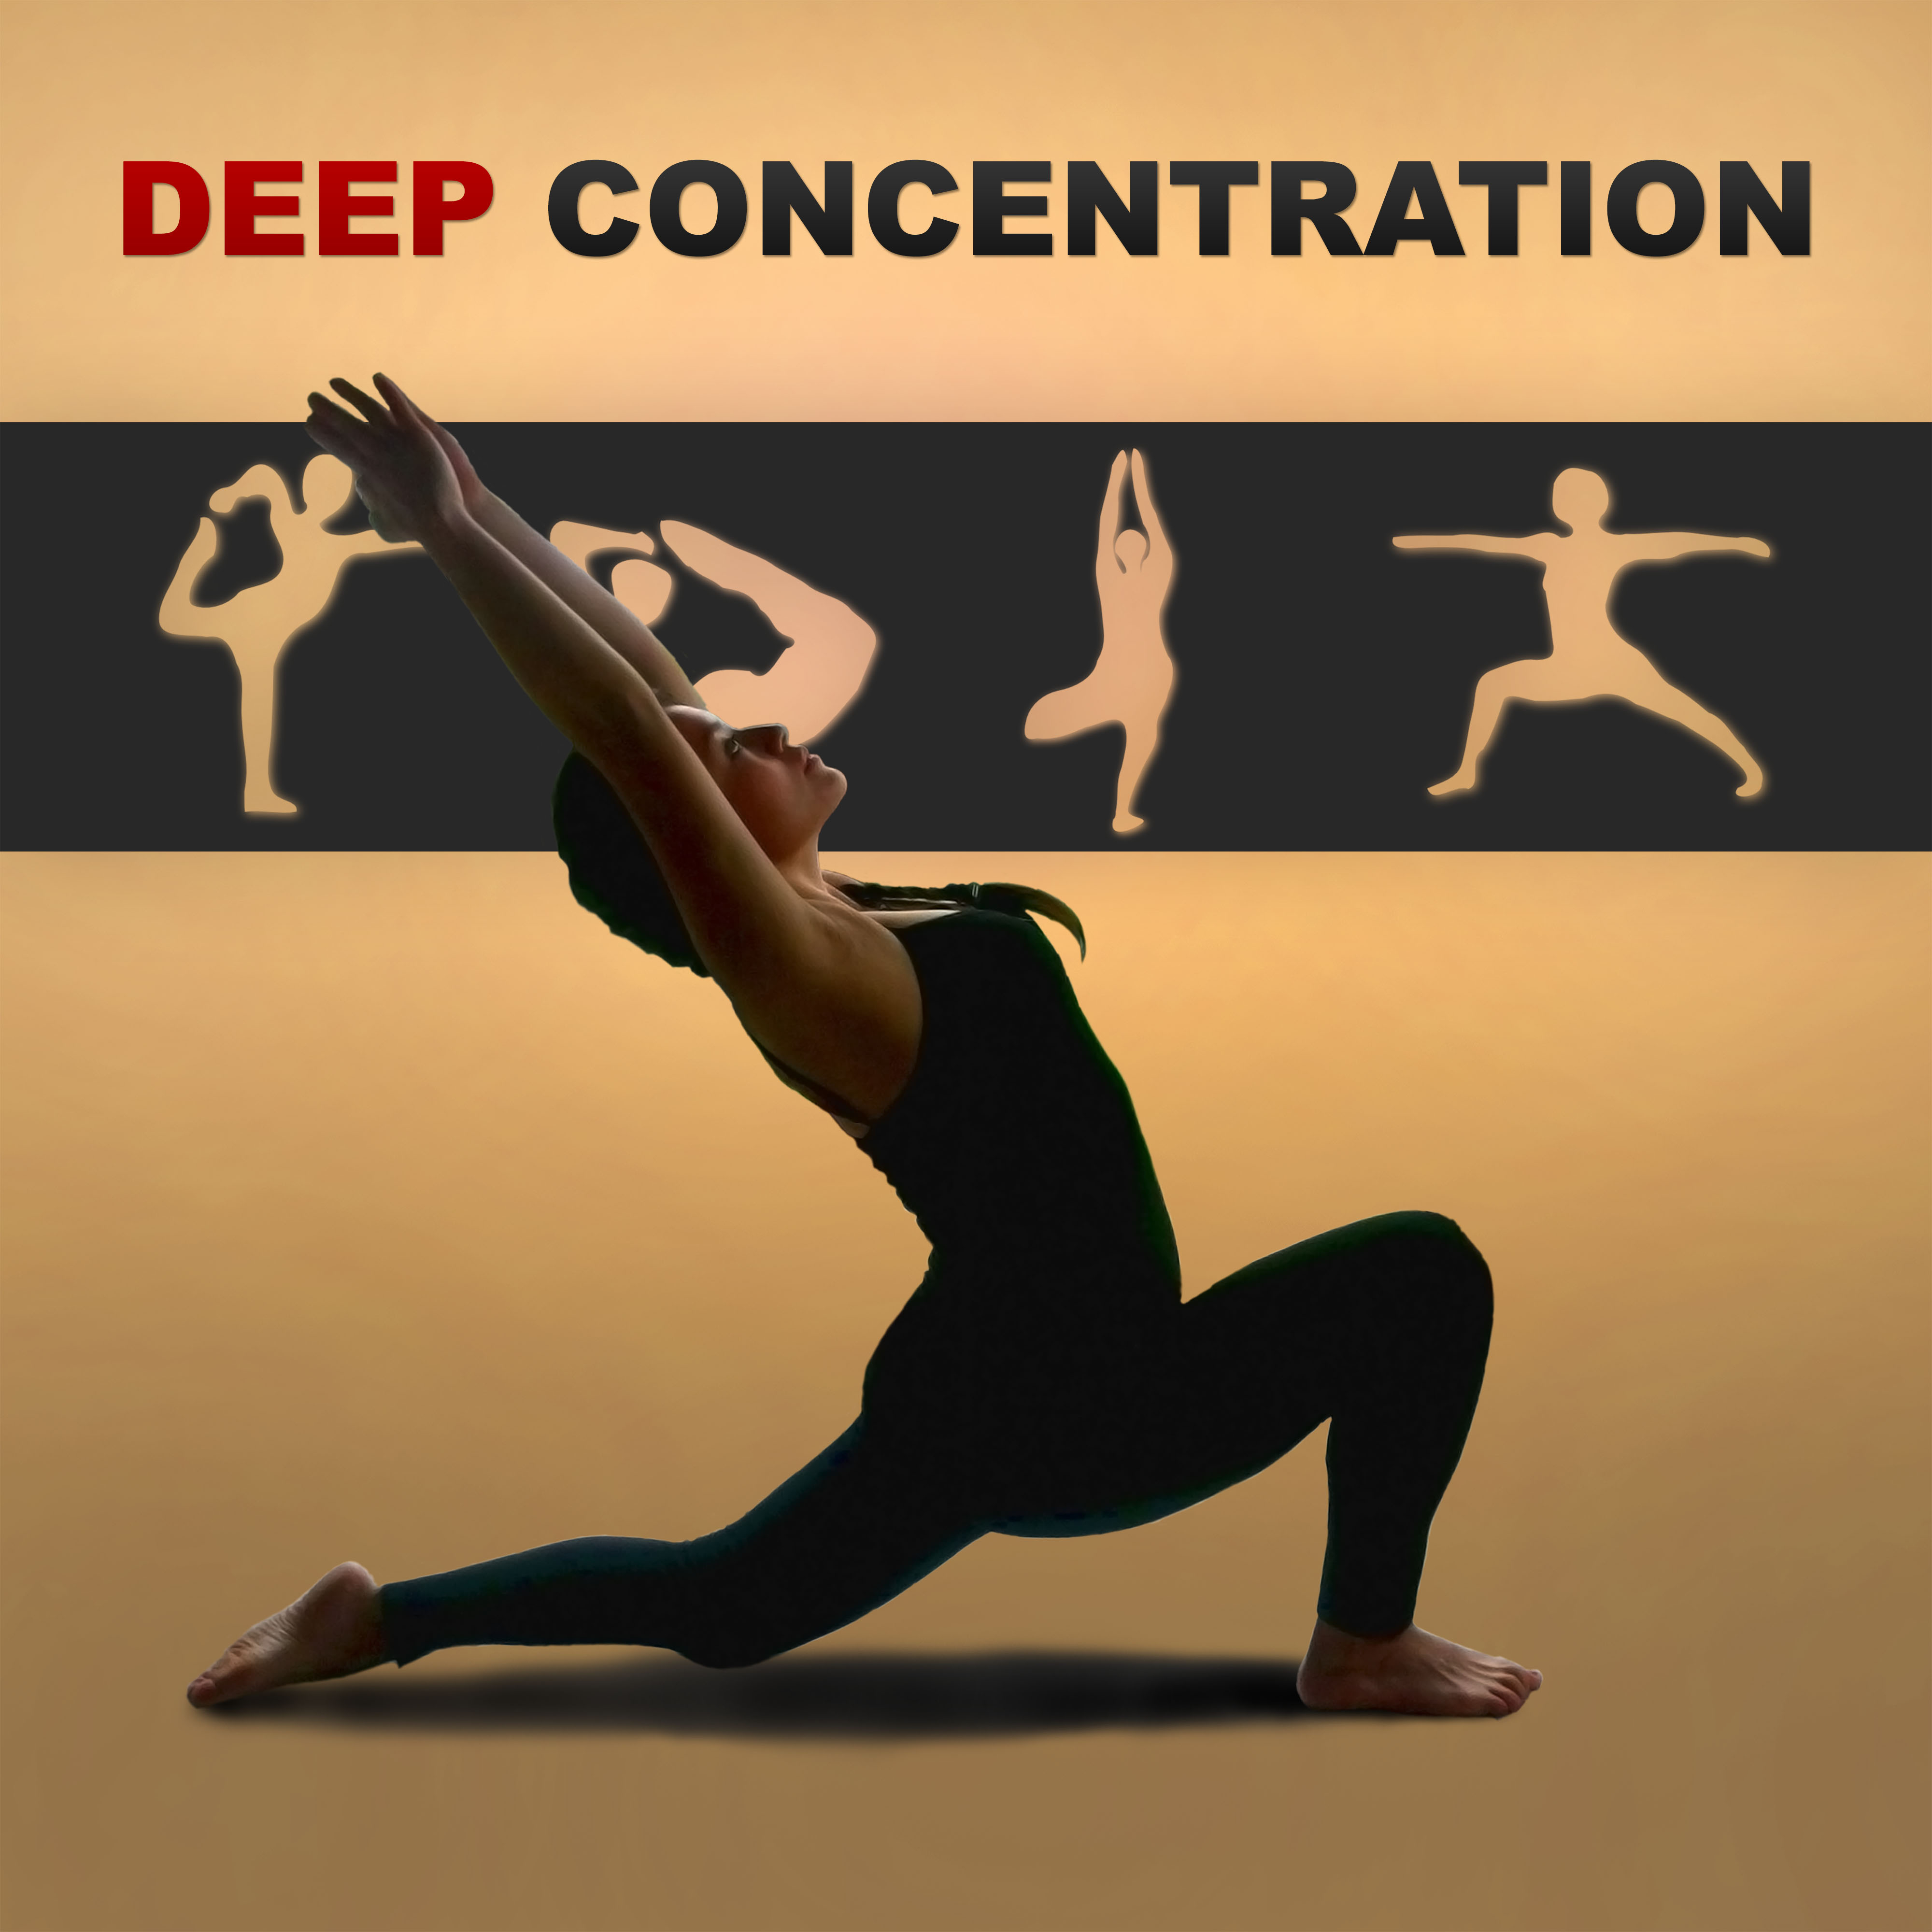 Deep Concentration – Increase Concentration, Focus Music, Stimulate Your Brain, Keep Calm, Meditation